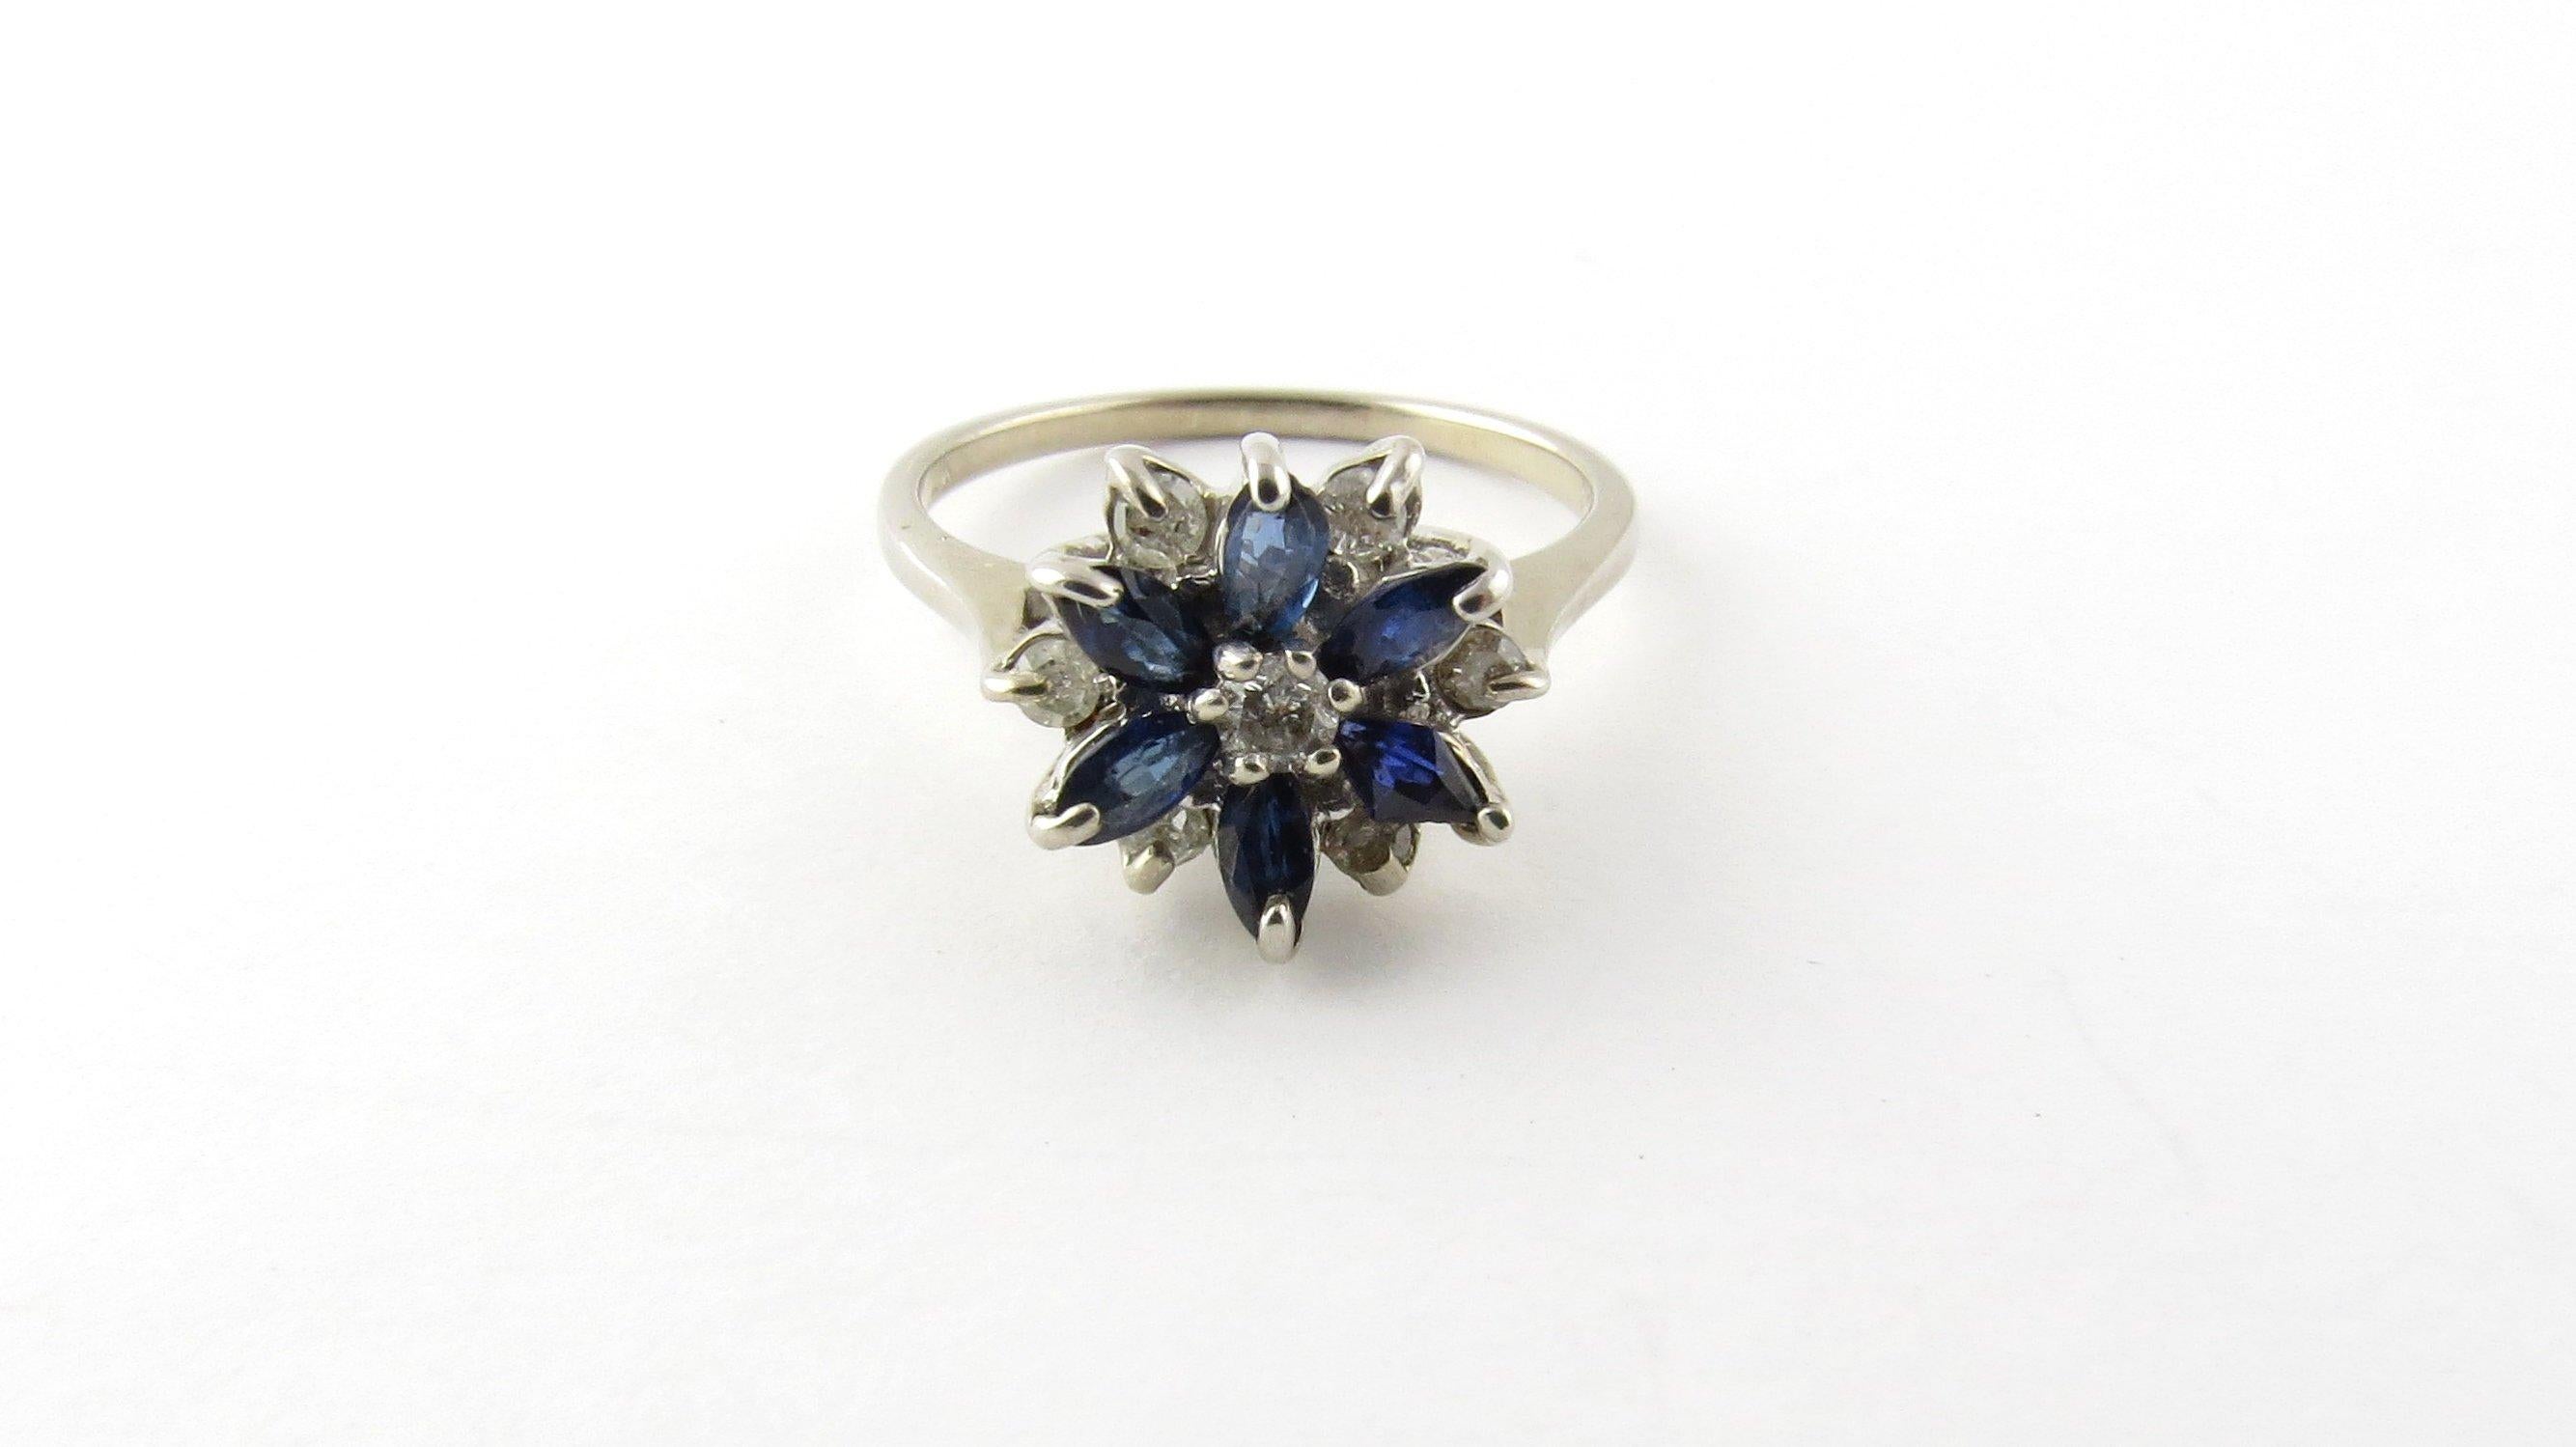 Vintage 14 Karat White Gold Diamond and Sapphire Ring Size 5.75- 
This elegant ring features six genuine marquis sapphires, one round brilliant cut diamond (center) and six round single cut diamonds set in a lovely floral design. Top of ring